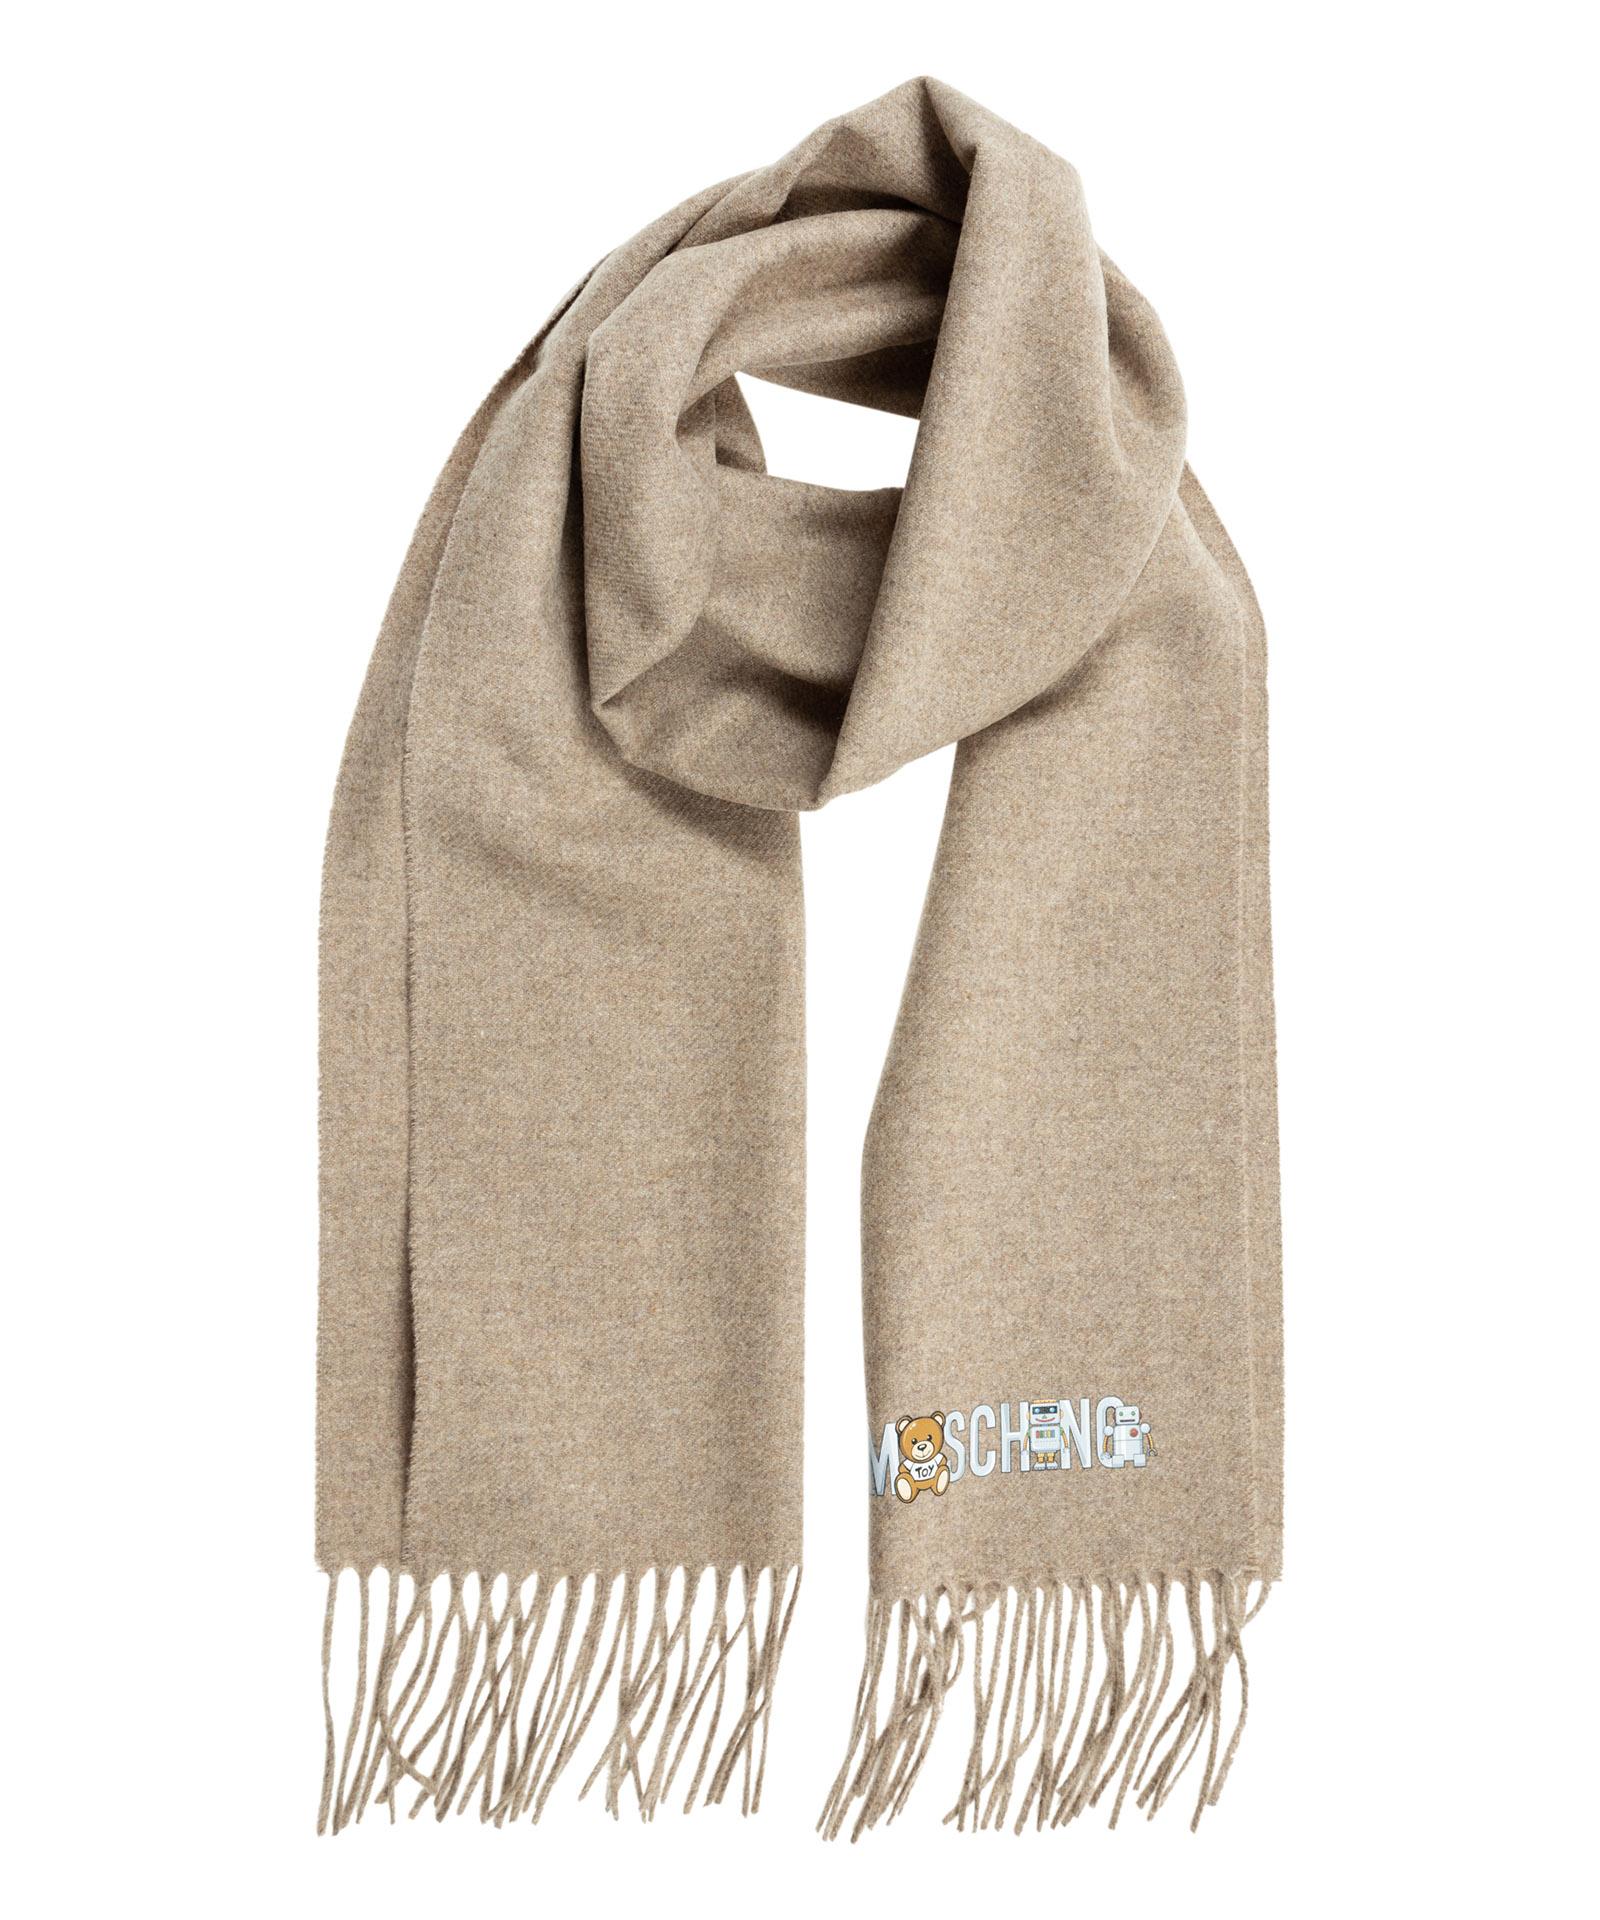 Moschino Toy Robot Wool Wool Scarf in Brown (Natural) for Men - Save 62% |  Lyst